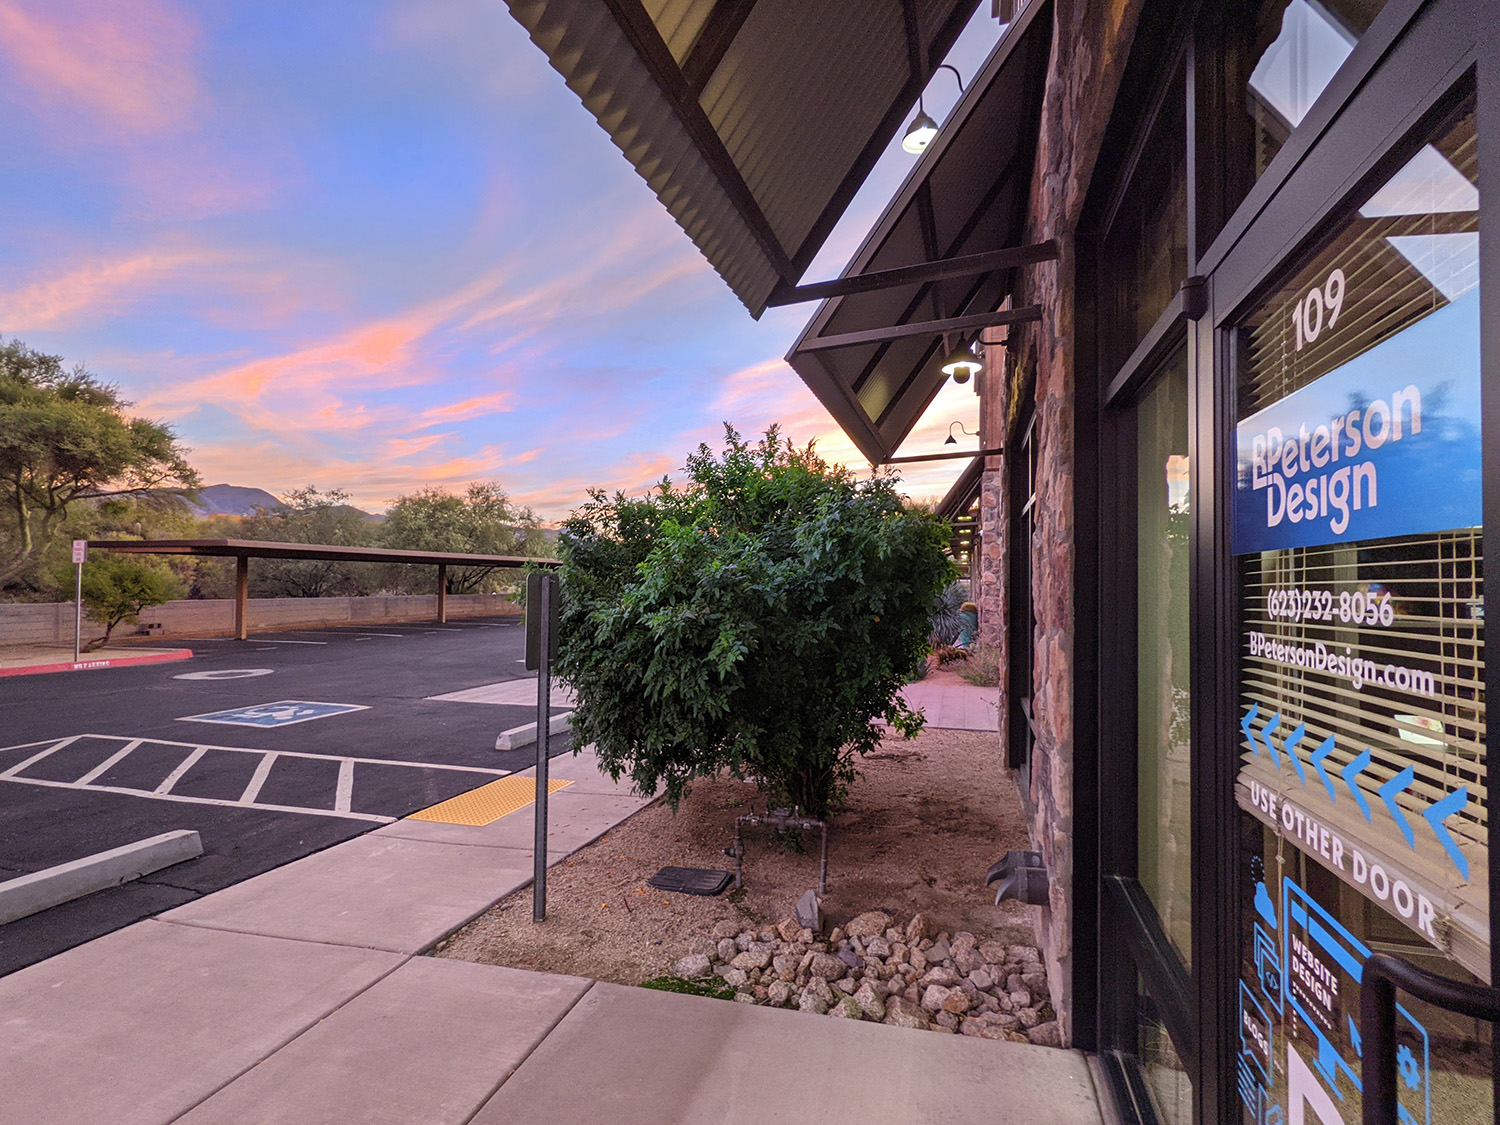 Sunset over BPetersonDesign's Cave Creek office